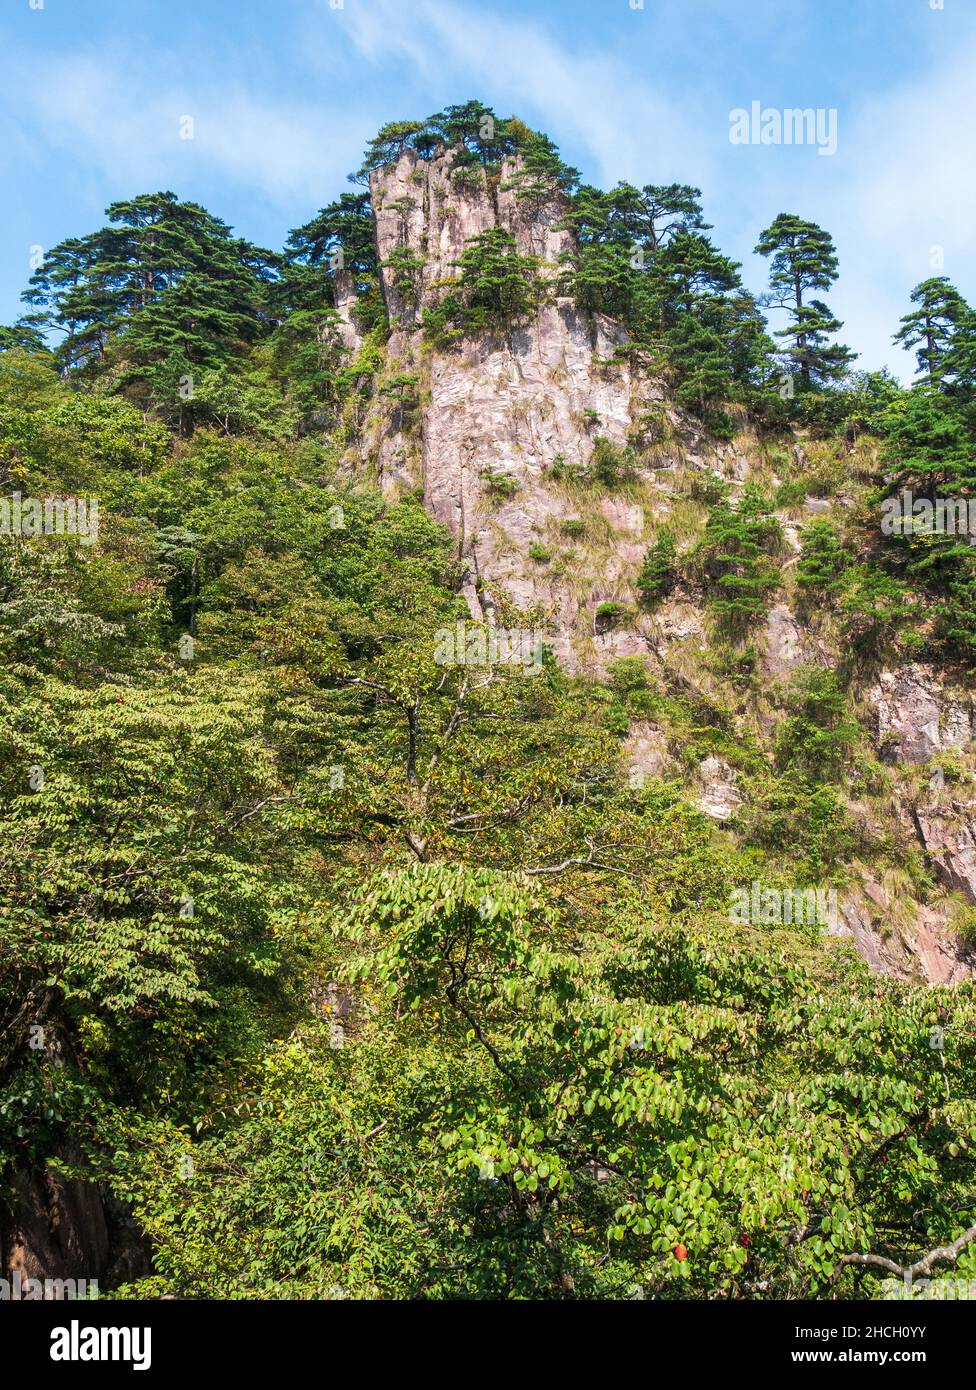 Rock at the yellow mountains with a beautiful blue sky on a summer day, Huangshan mountains, Anhui, Huangshan, China, Asia, Stock photo Stock Photo